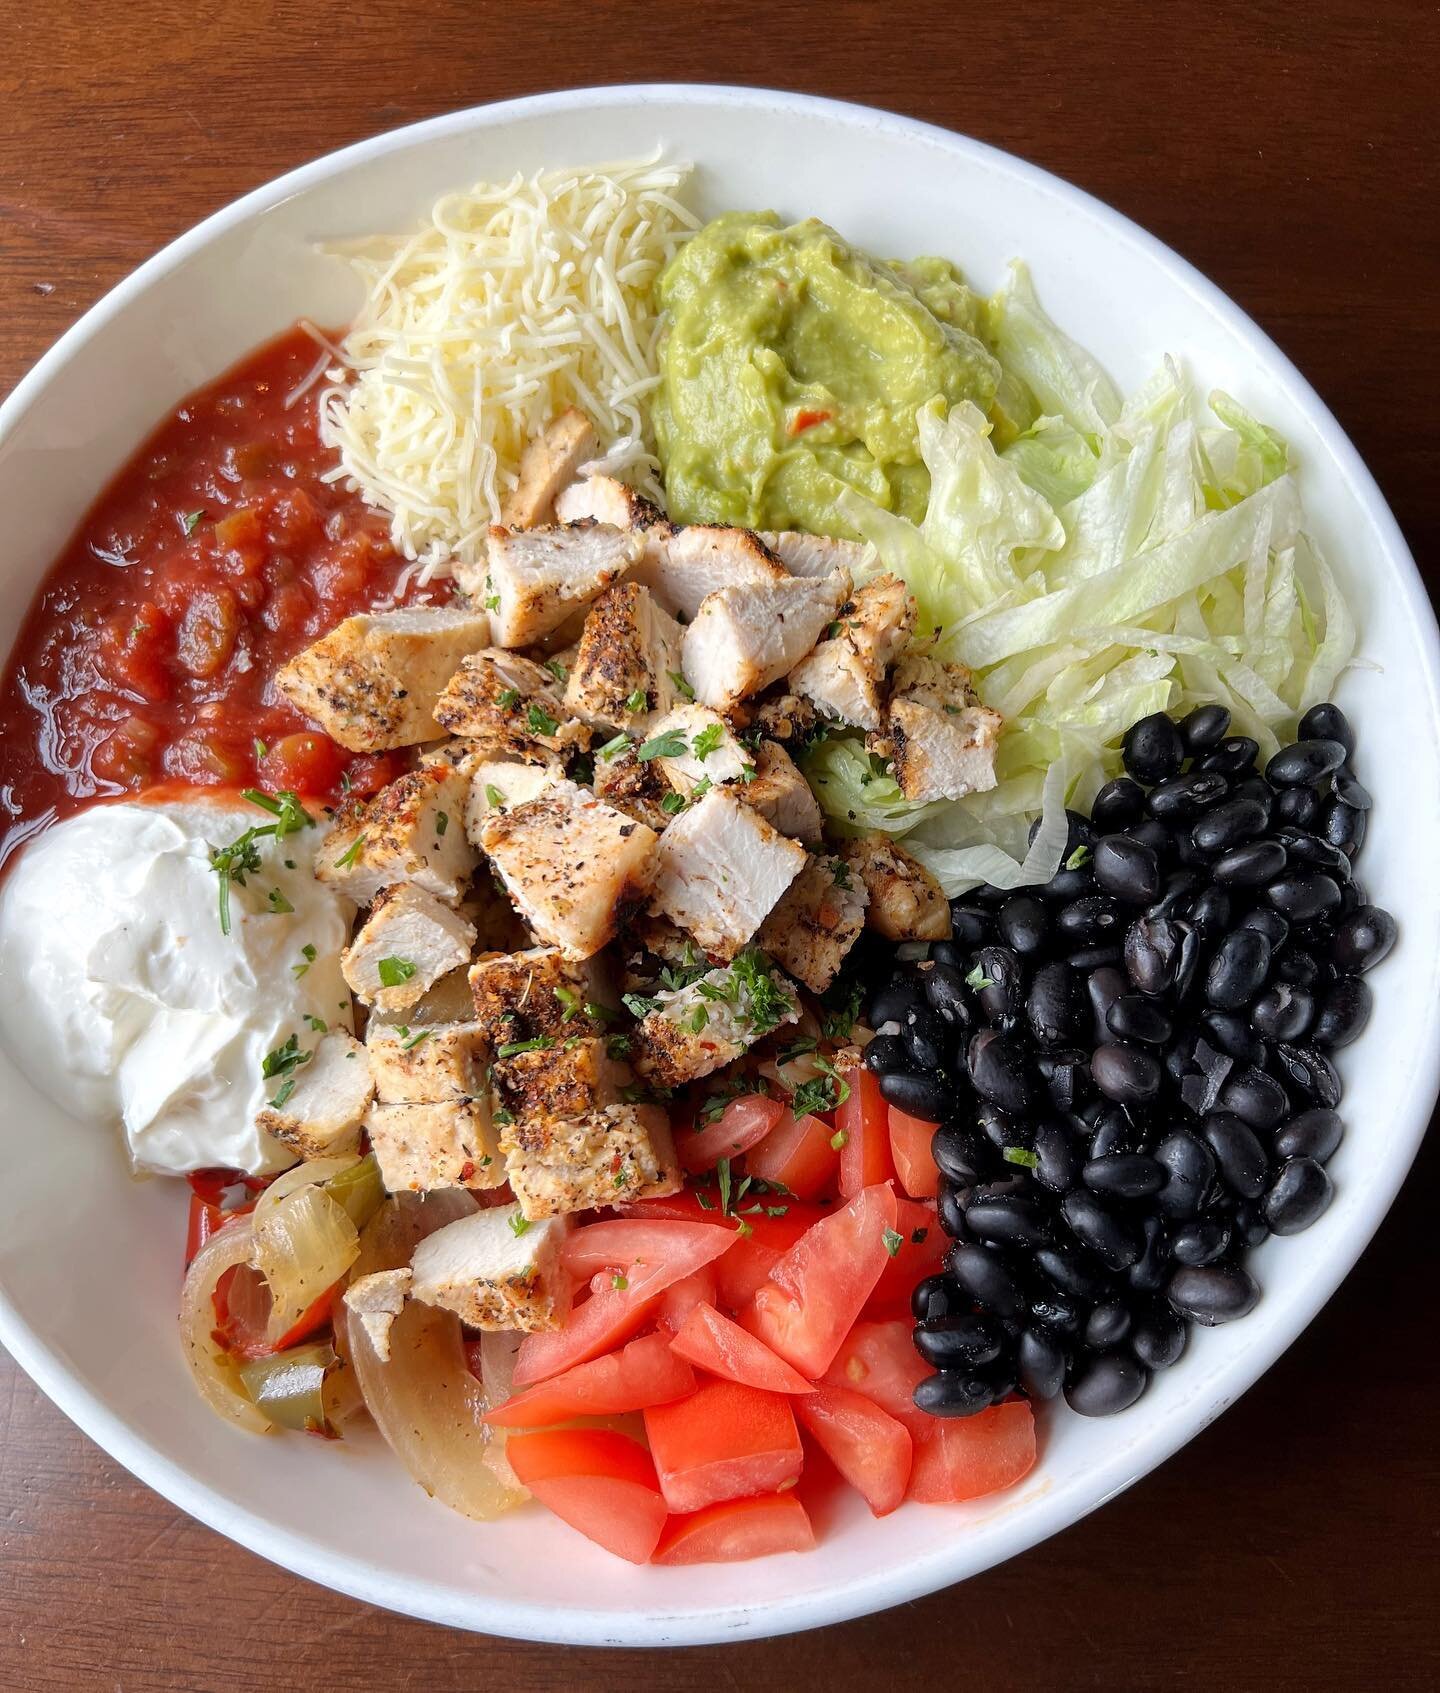 A colorful plate makes it a healthy plate right? 😜 On the specials this week 
FAJITA BURRITO BOWL black beans, shaved lettuce, chopped tomatoes, saut&eacute;ed onions, saut&eacute;ed peppers, spanish rice, salsa, sour cream, guacamole and shaved jac